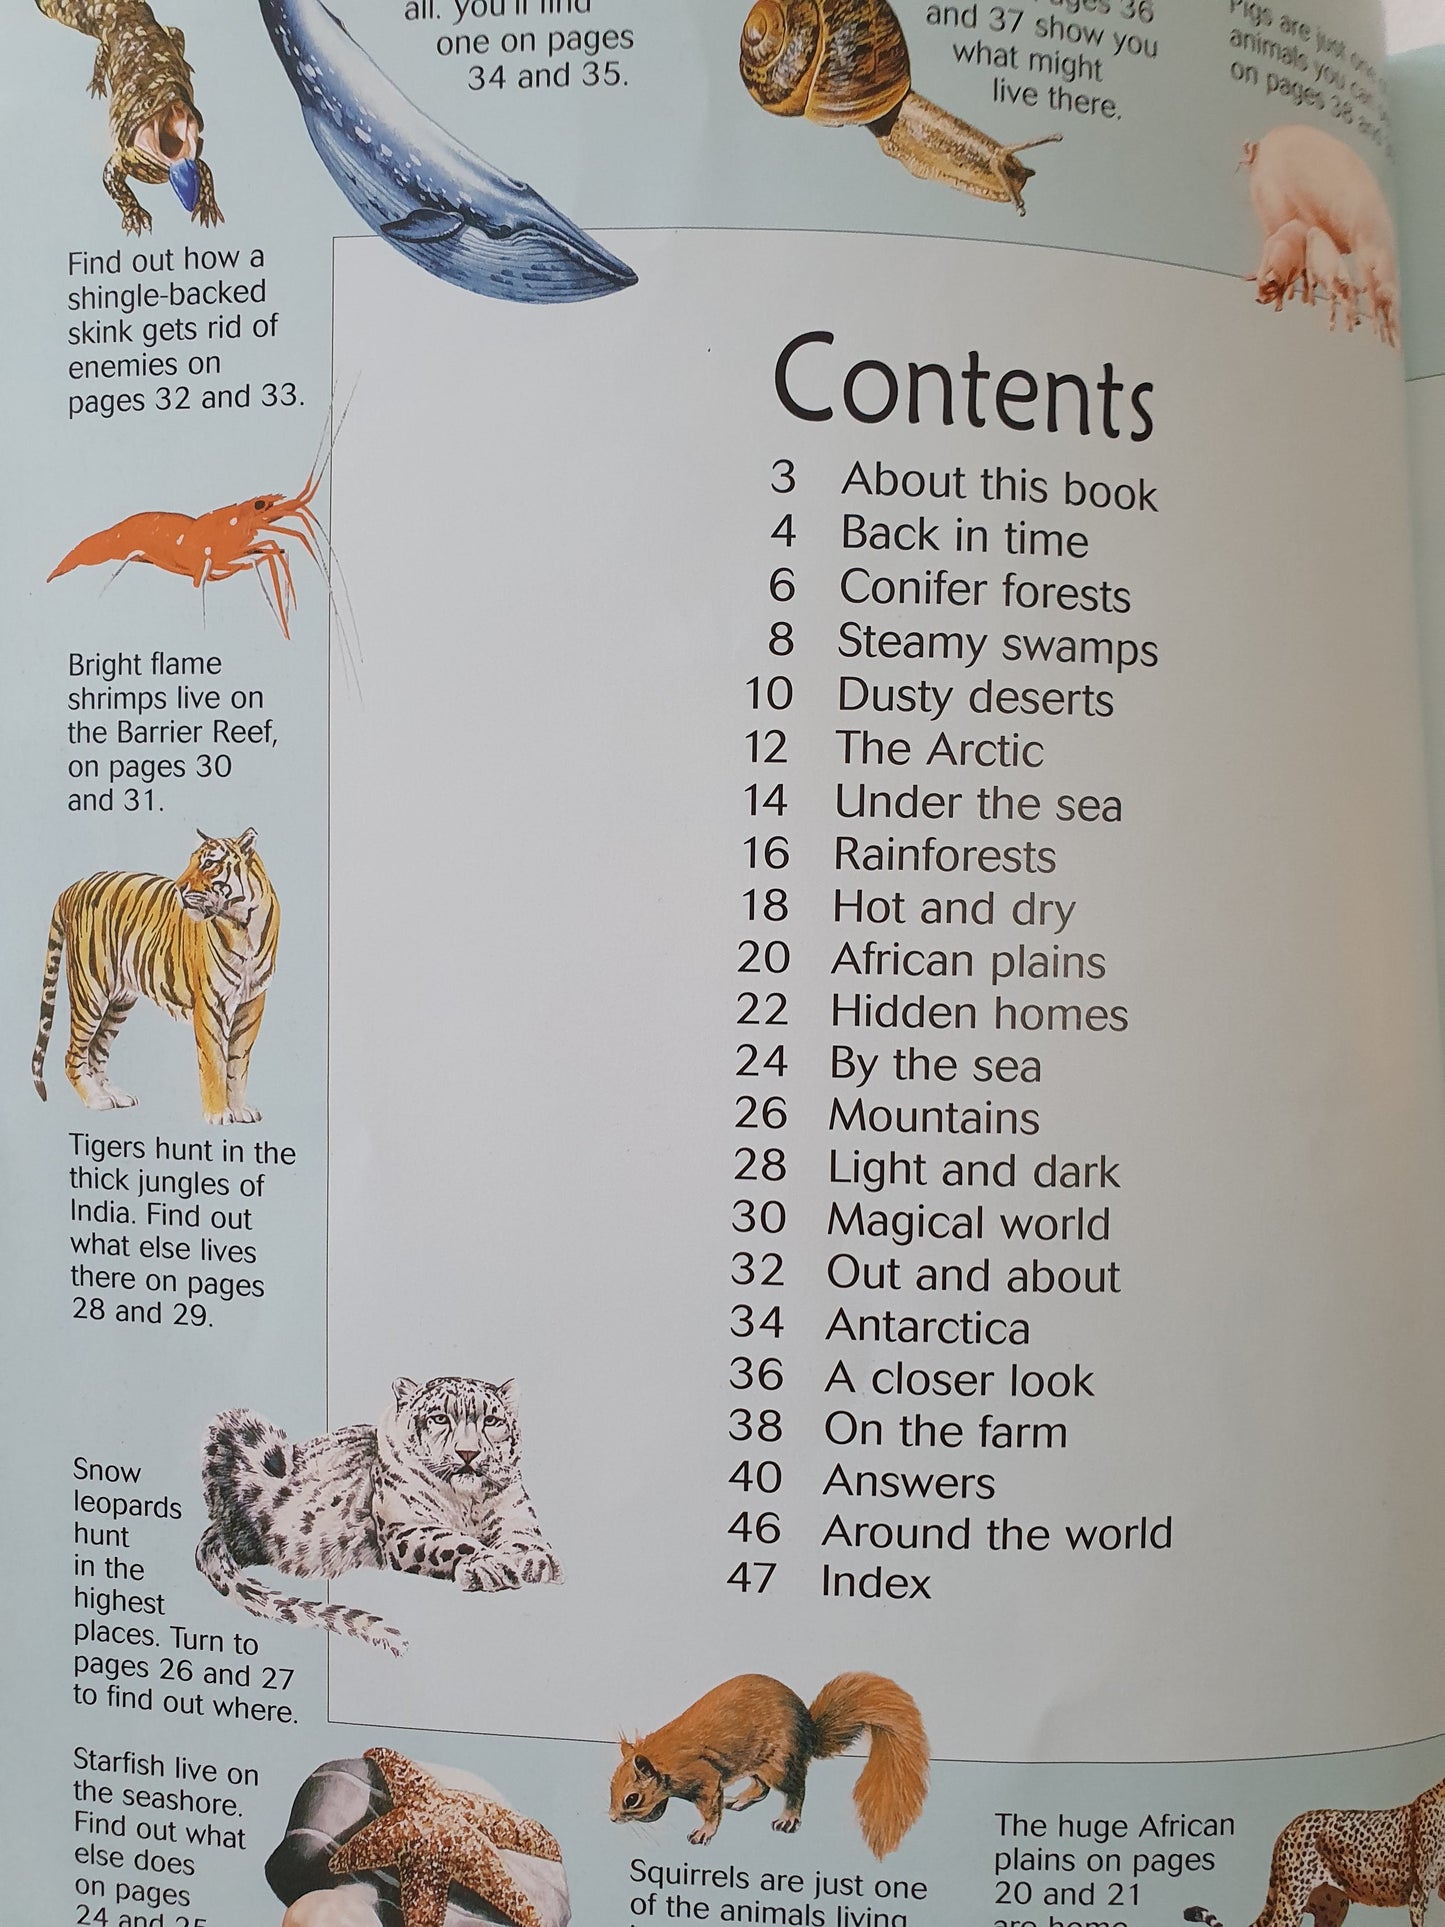 The Great Animal Search Like New Usborne  (6249362423993)